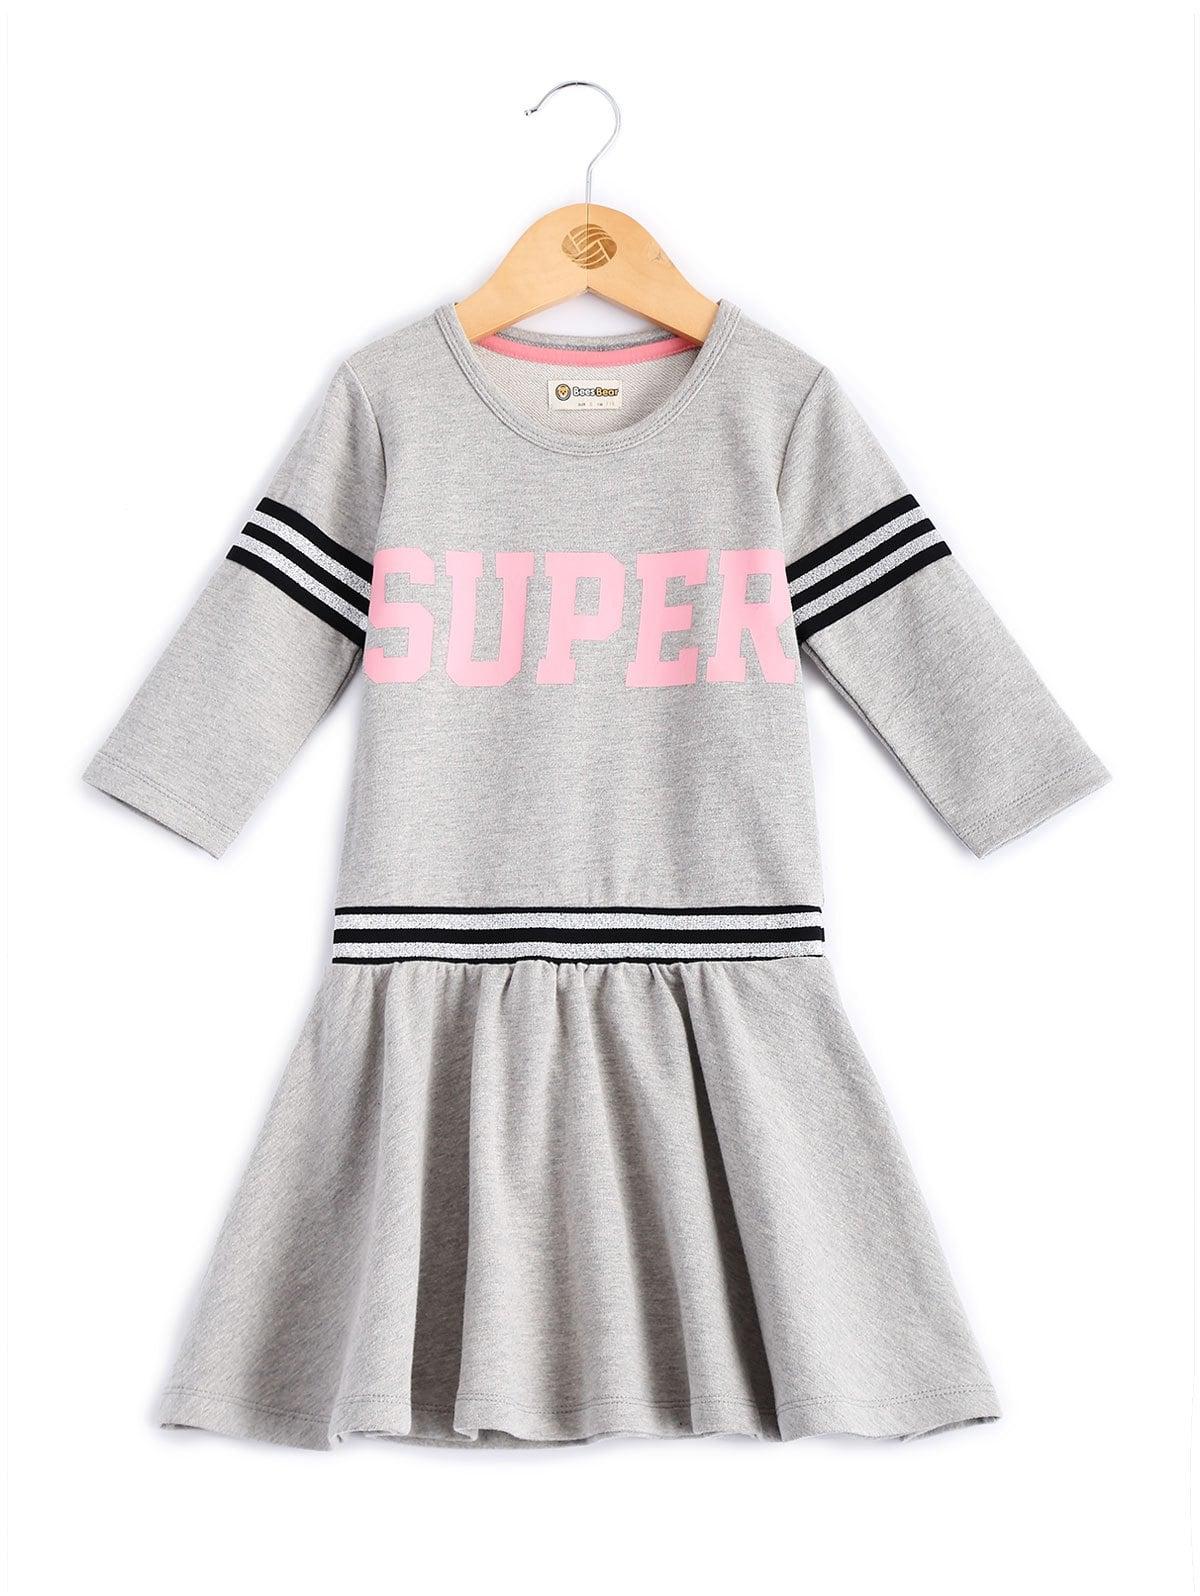 Six Letter Clothing Logo - Casual Attire | Light Gray CHILD-6 Letter Print Kids Two Piece Dress ...